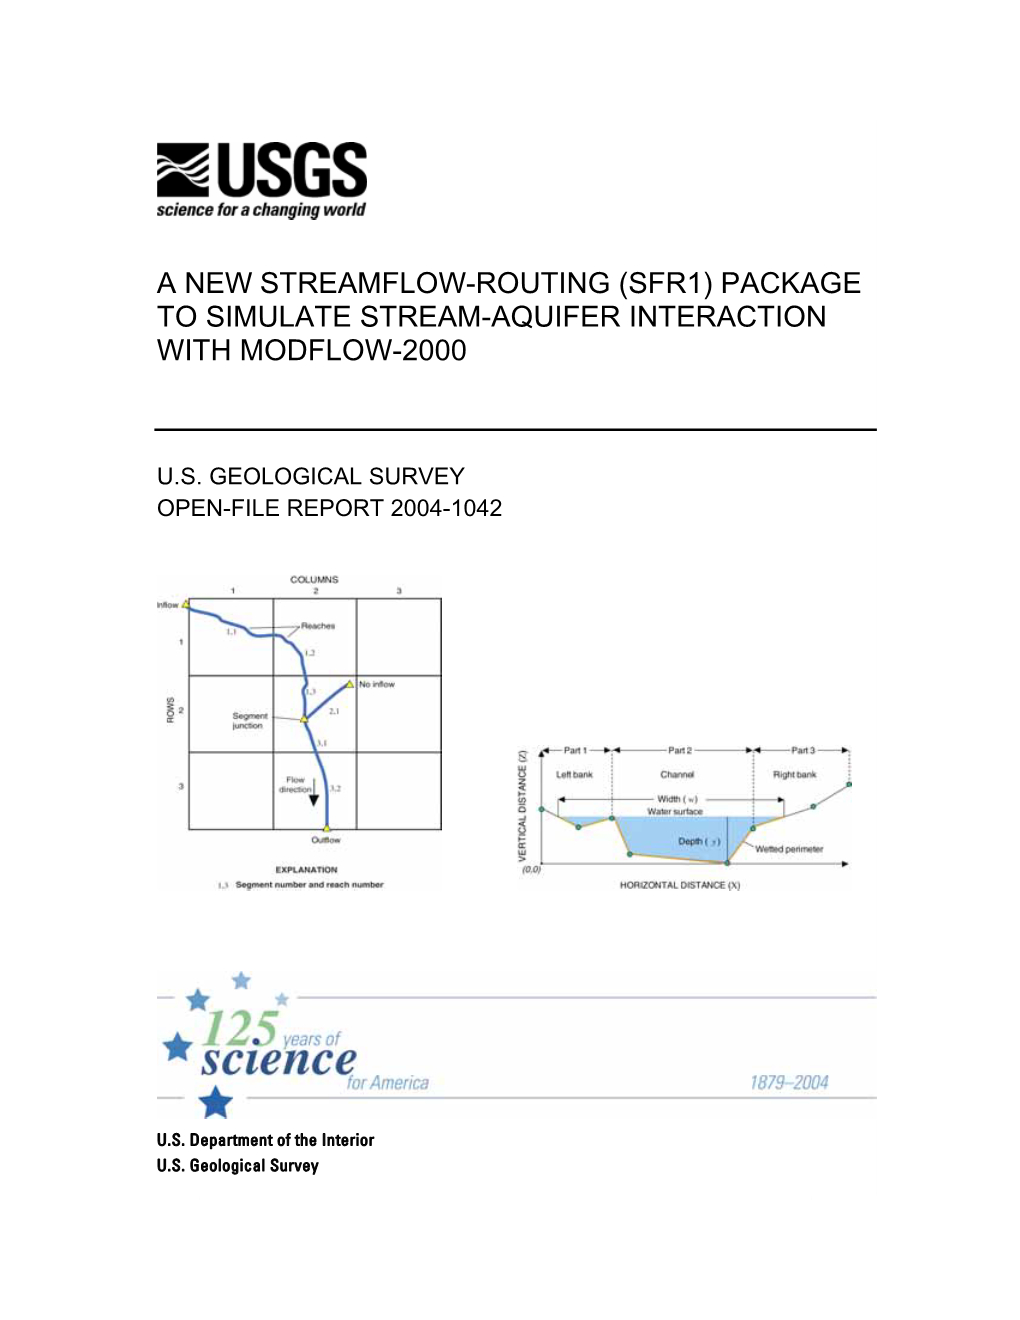 A New Streamflow-Routing (SFR1) Package to Simulate Stream-Aquifer Interaction with MODFLOW-2000 a NEWU.S